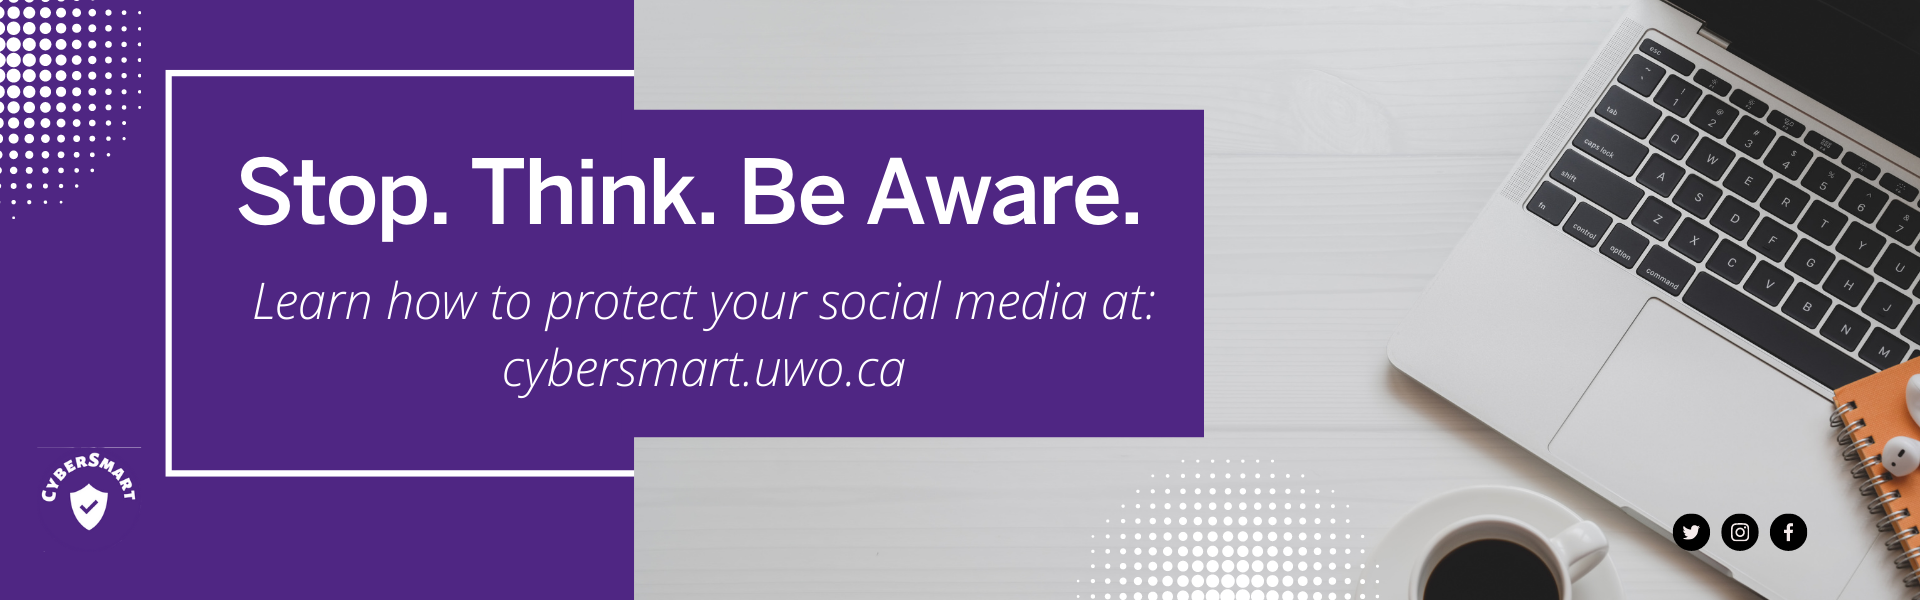 Learn how to protect your social media at cybersmart.uwo.ca